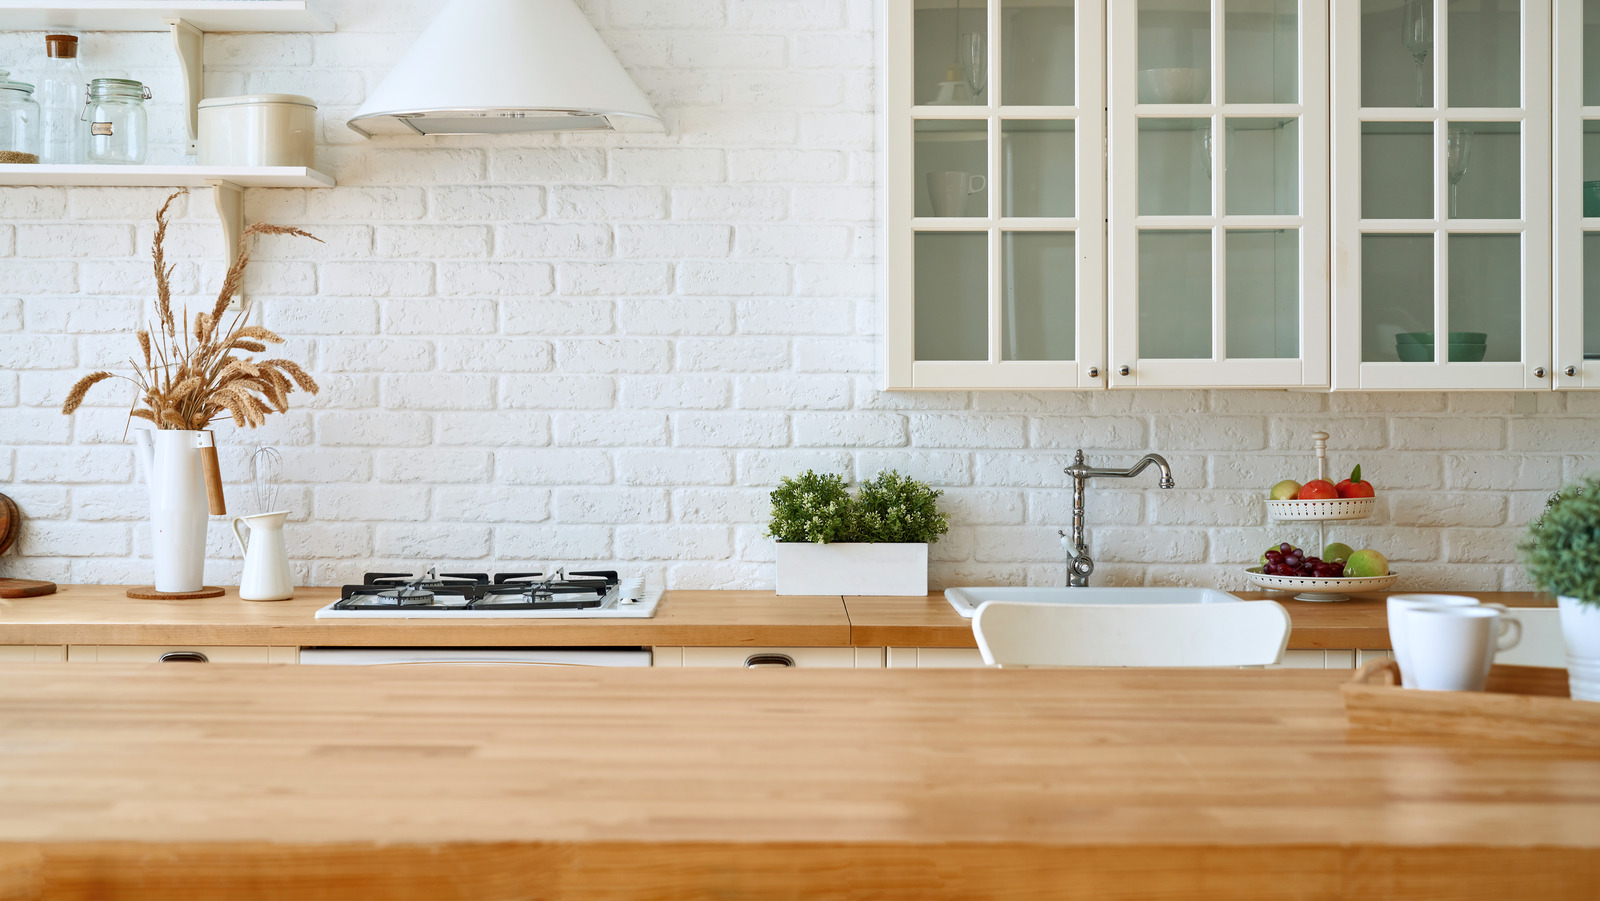 Butcher Block Countertop: What To Know Before You Buy